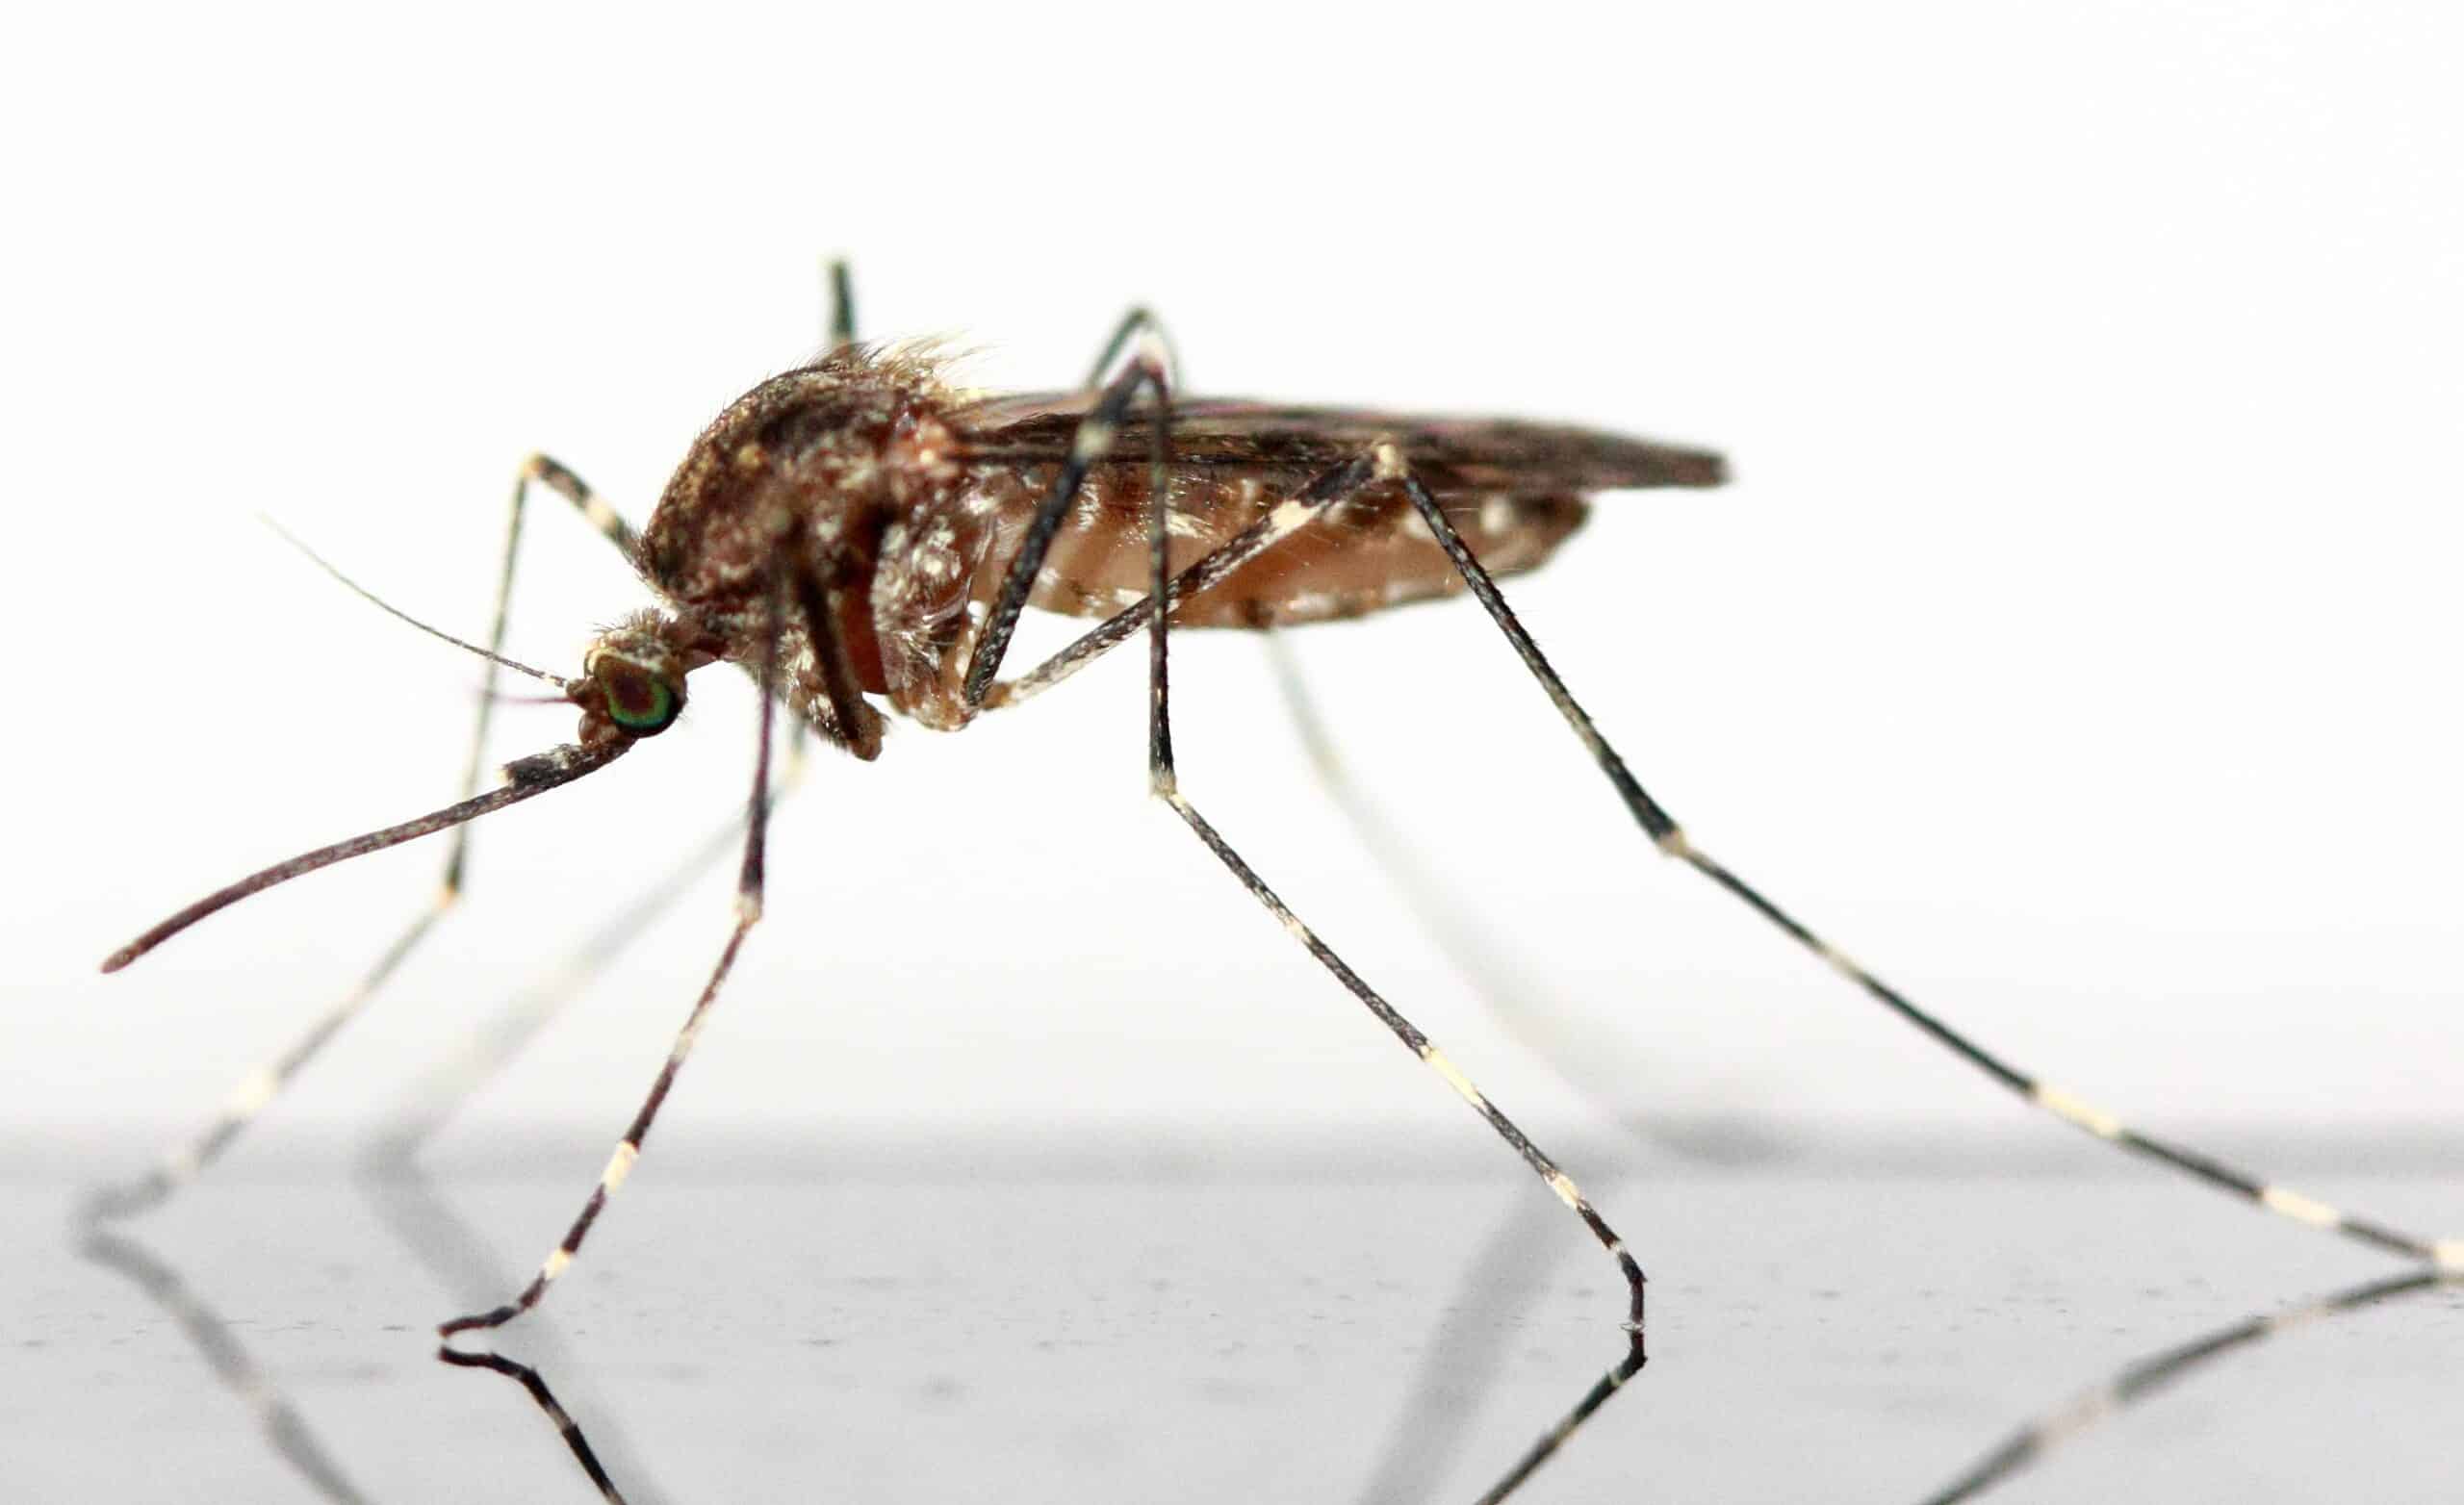 Mosquitoes can bite you anywhere at any time